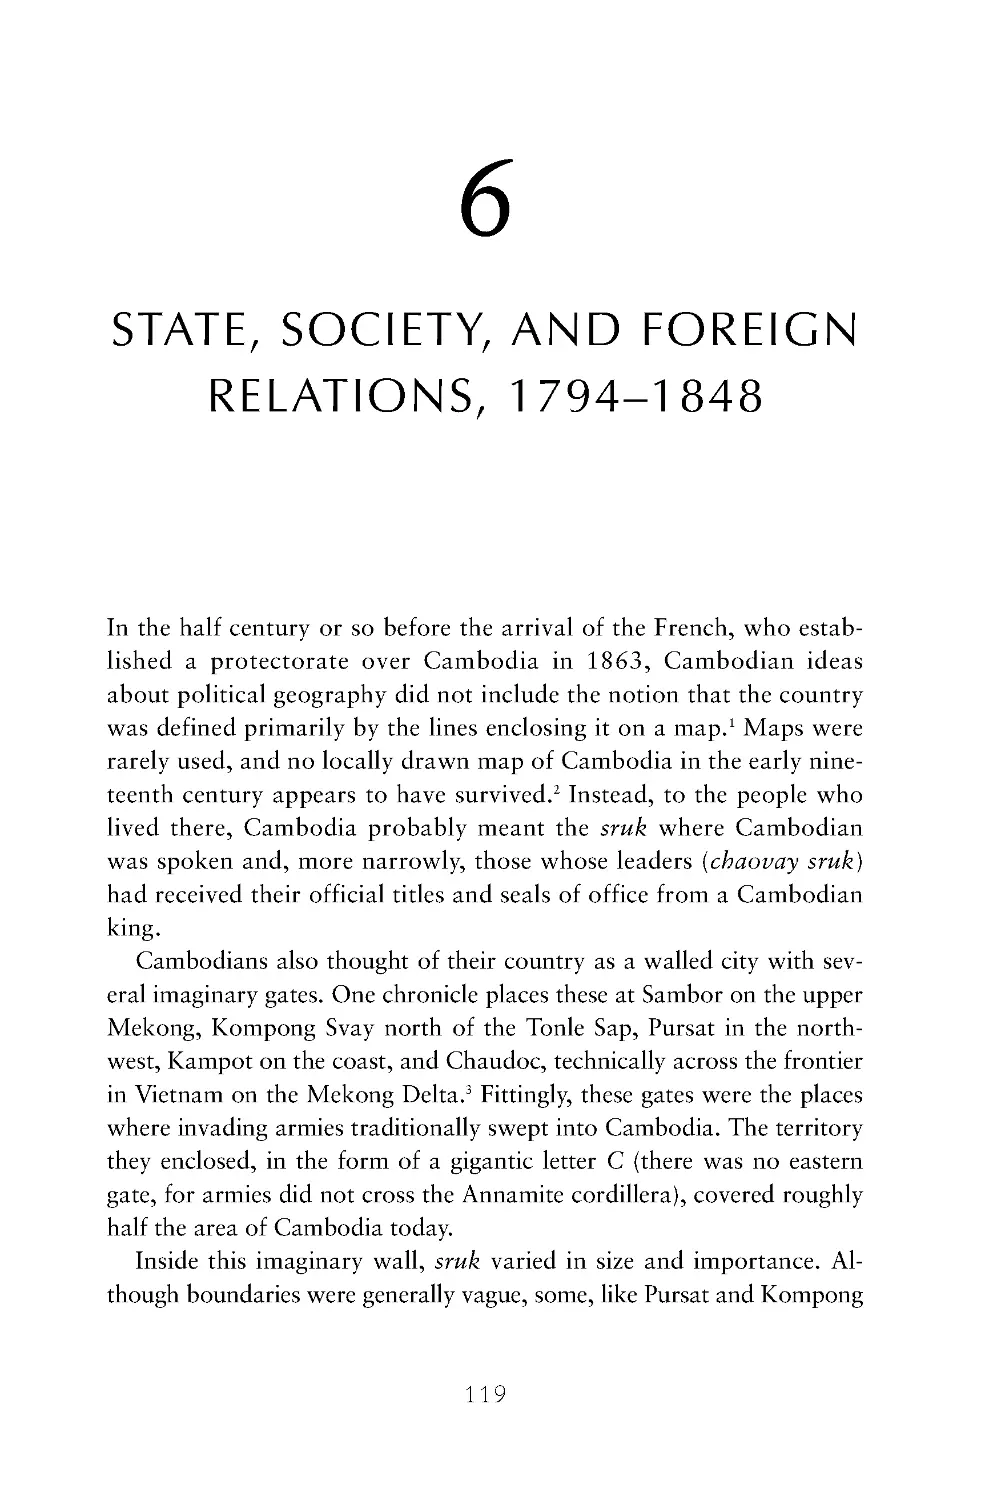 6. State, Society, and Foreign Relations, 1794-1848